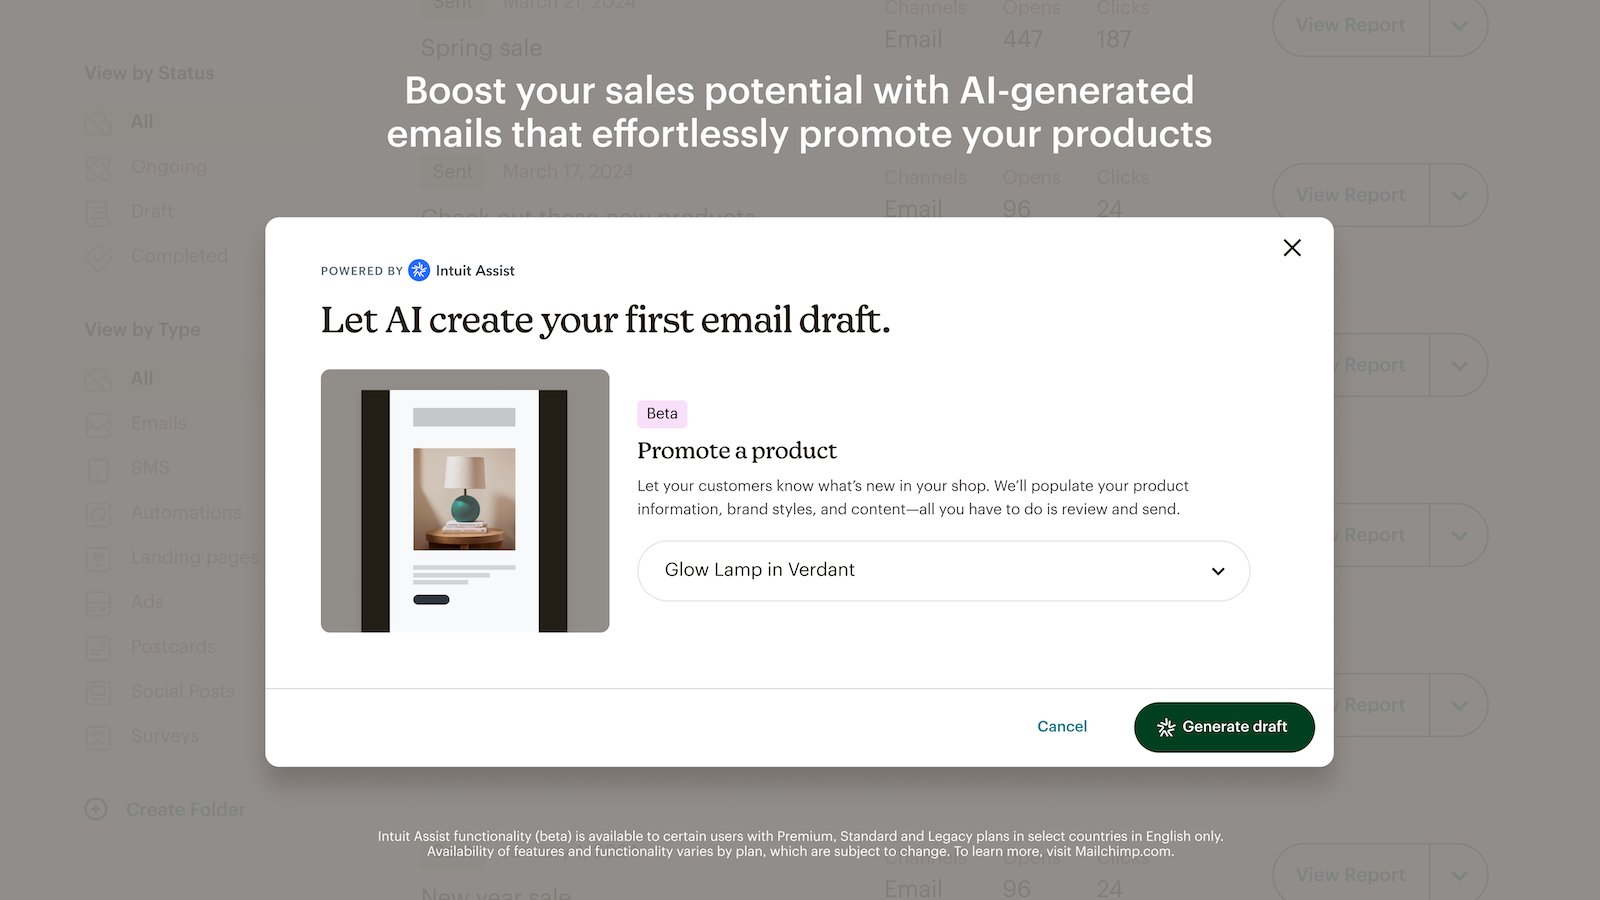 Intuit Assist populating and promoting product information